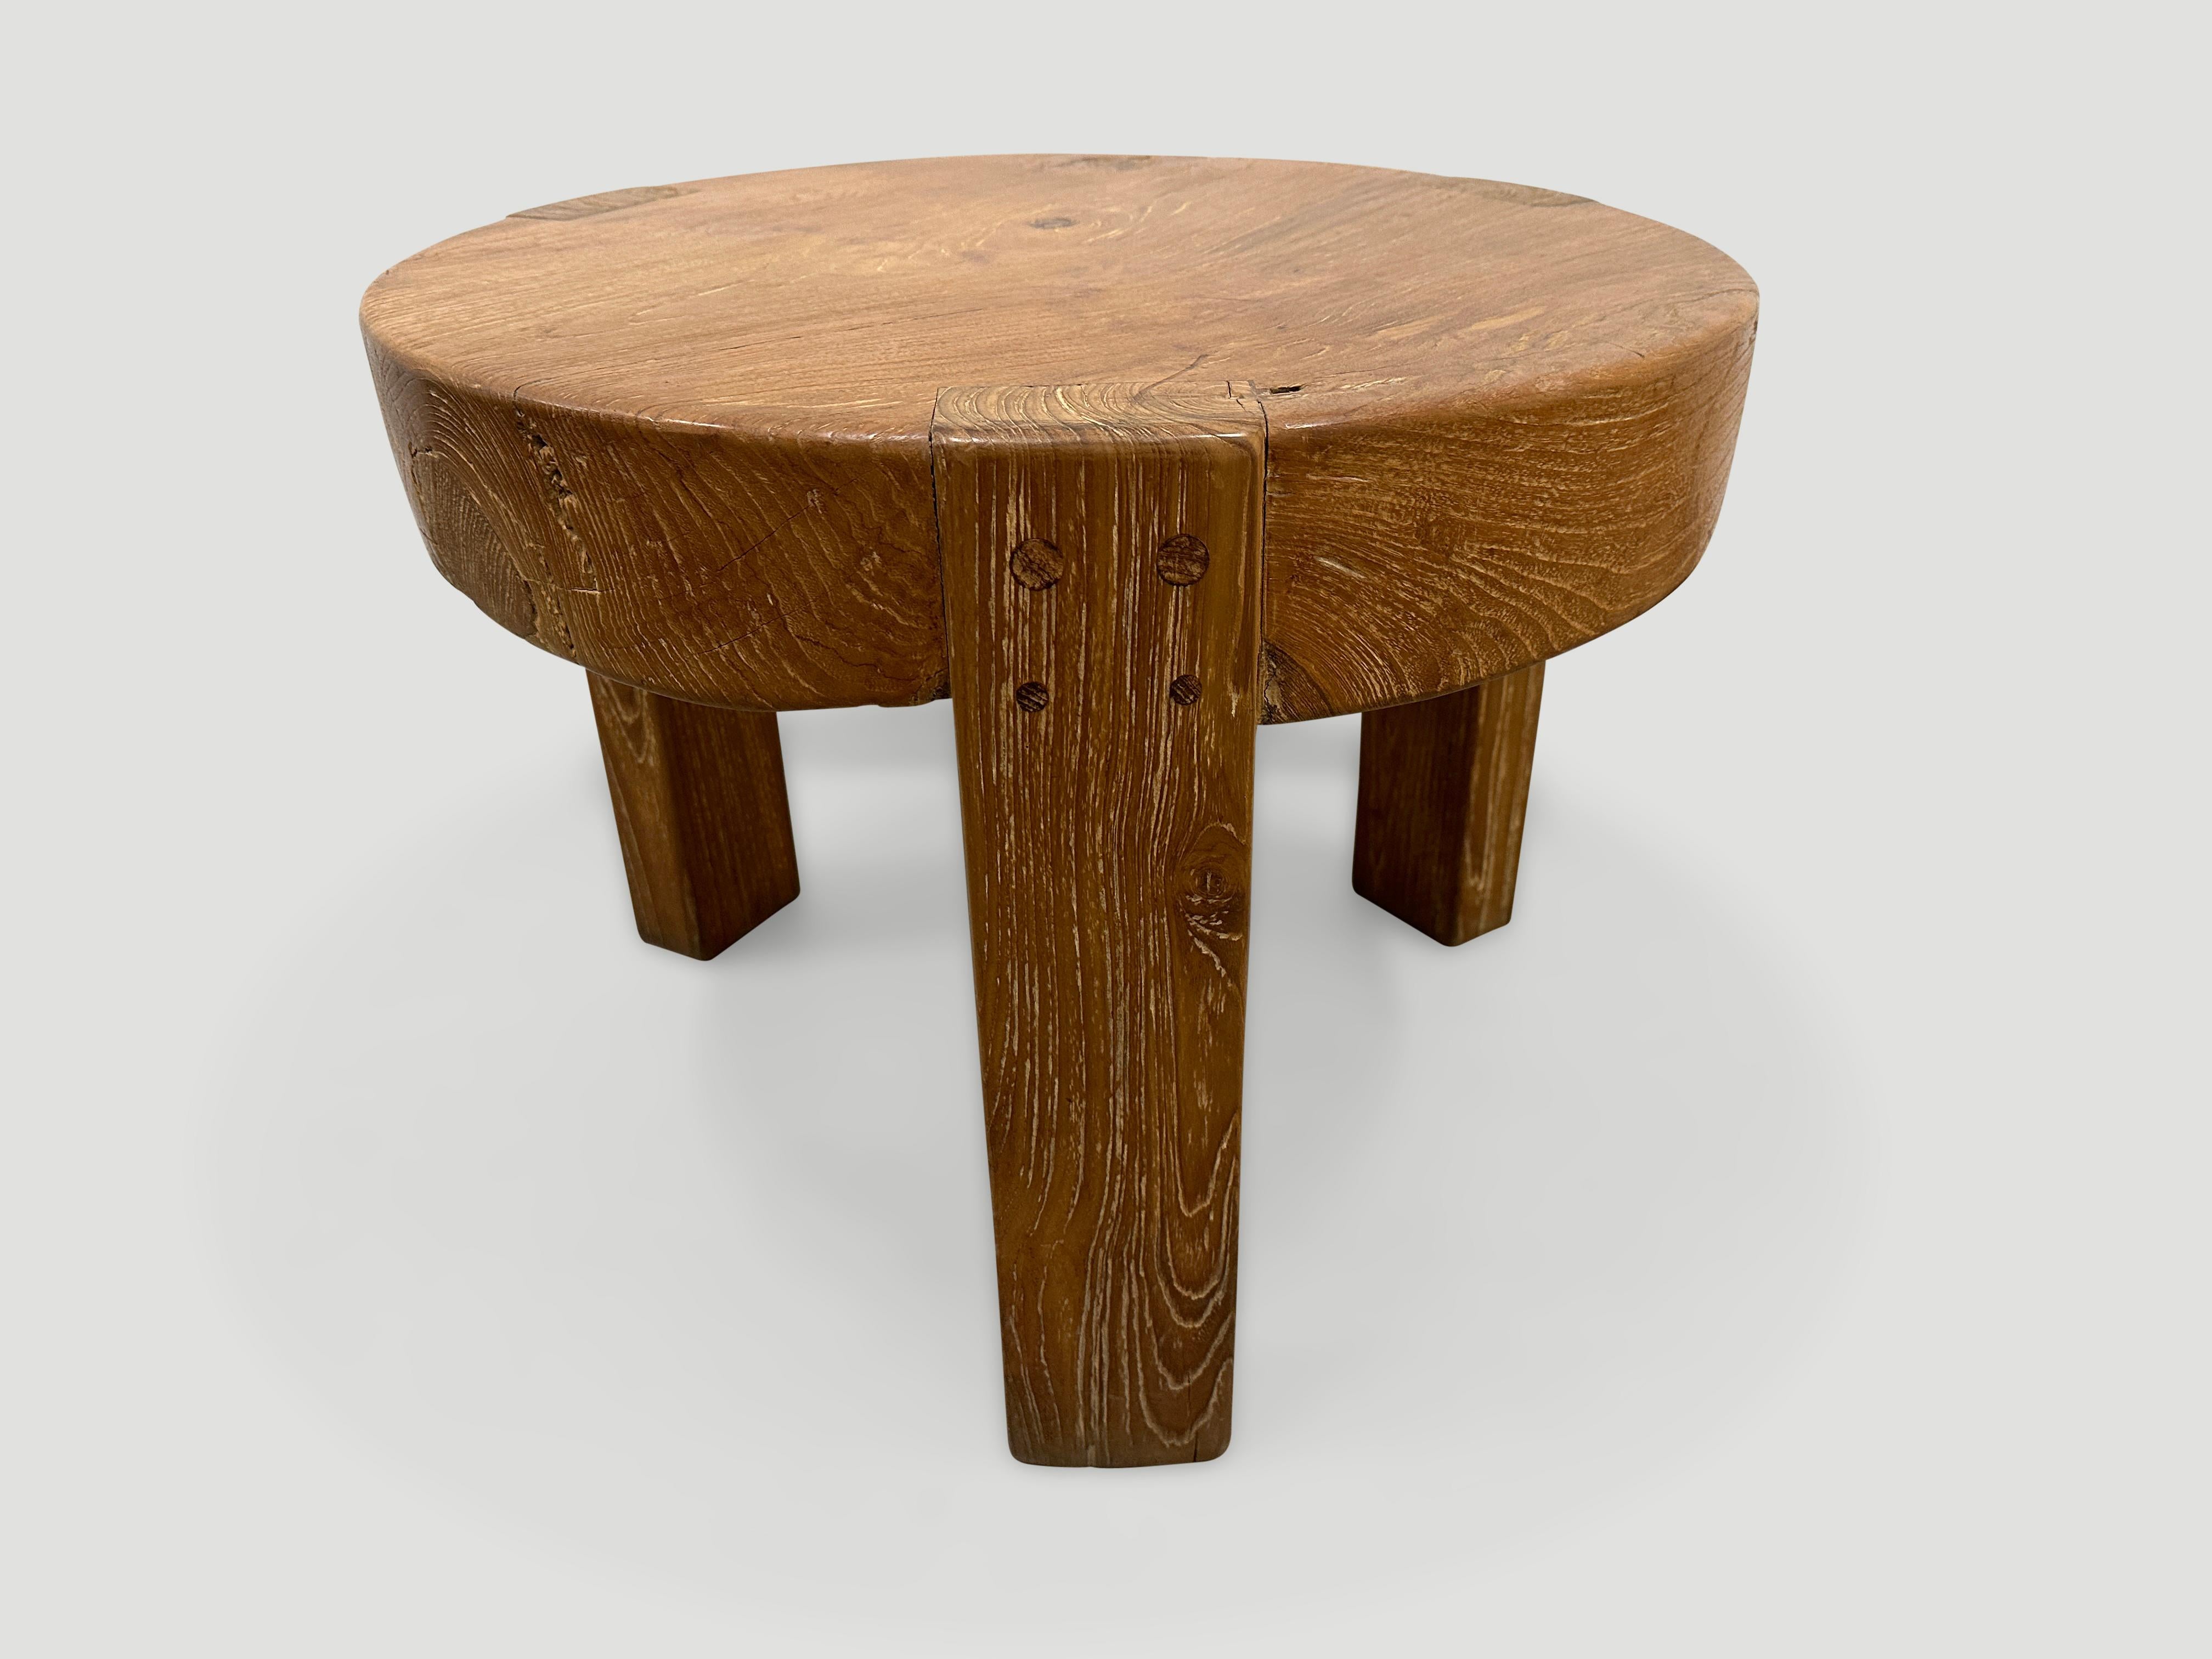 Andrianna Shamaris Natural Teak Wood Round Side Table In Excellent Condition For Sale In New York, NY